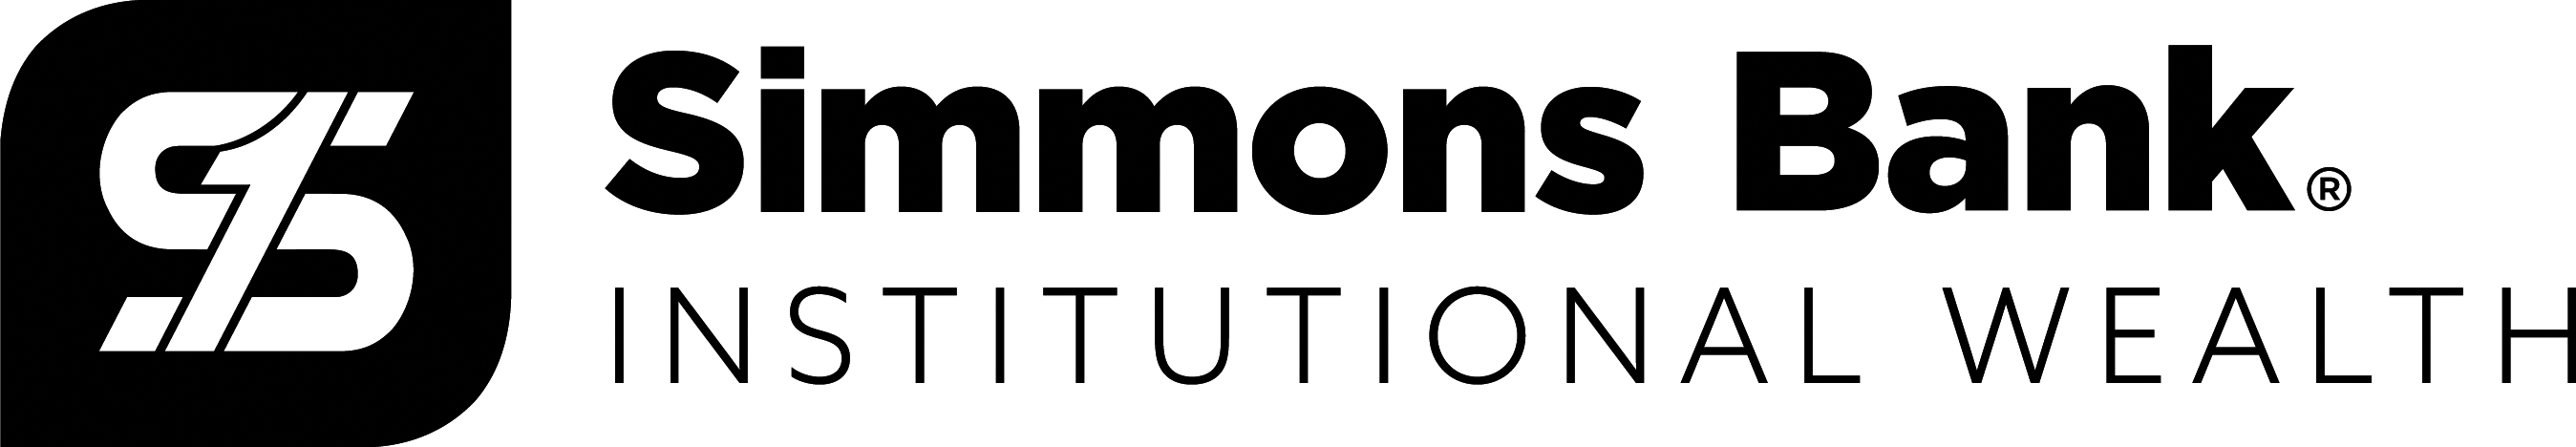 Simmons Bank Institutional Wealth